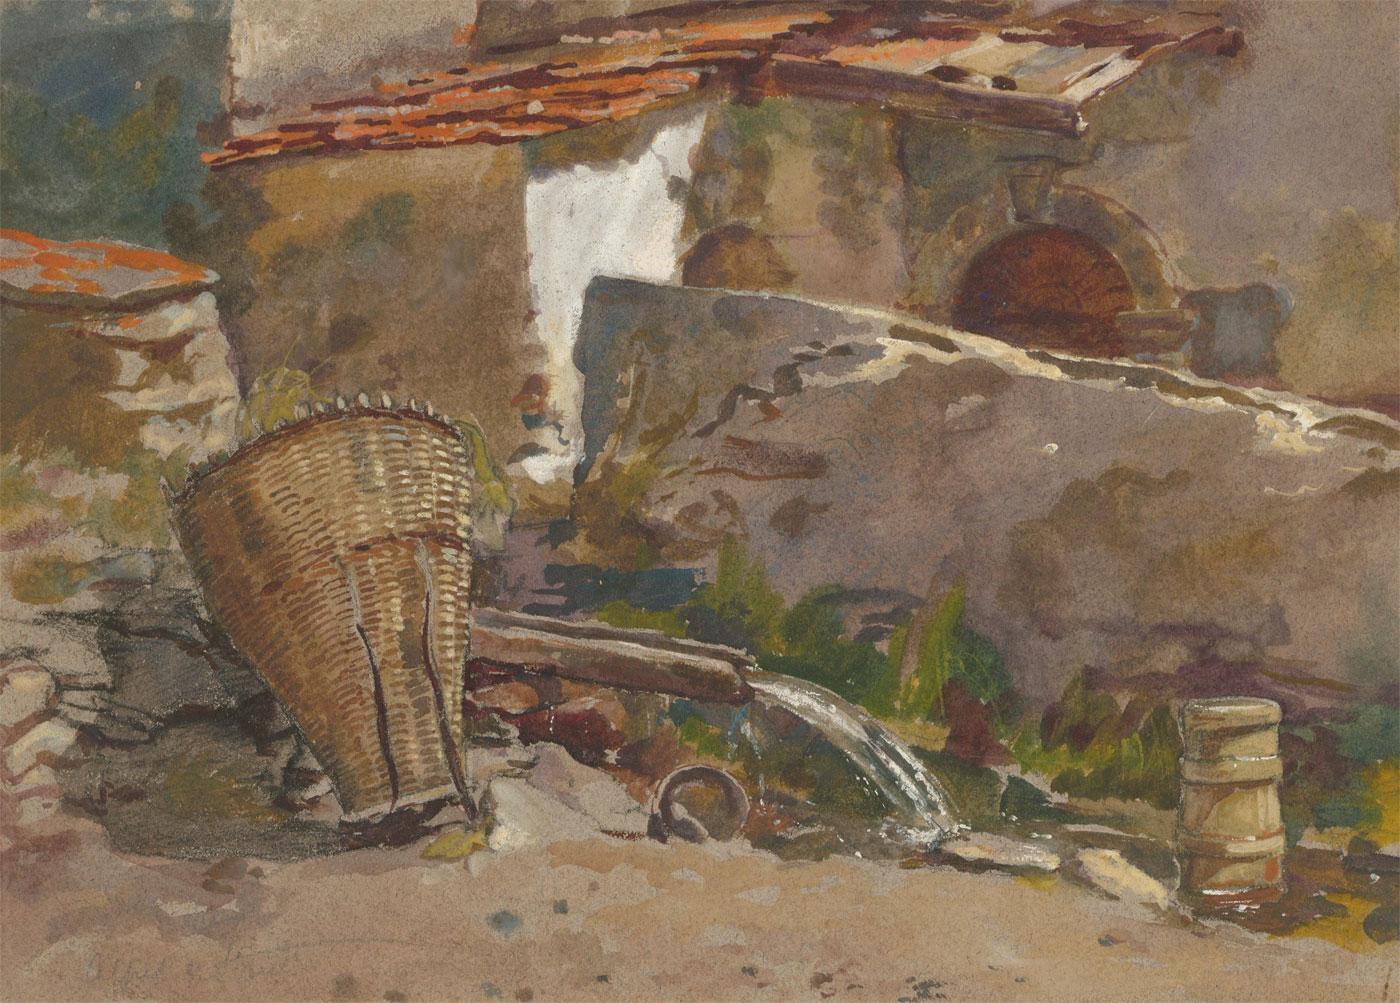 A finely detailed watercolour with charcoal outline showing a section from the street outside a church in Ronda, Spain. The location has been detailed in a separate inscription. Strutt has captured the detail of the woven basket and flowing water